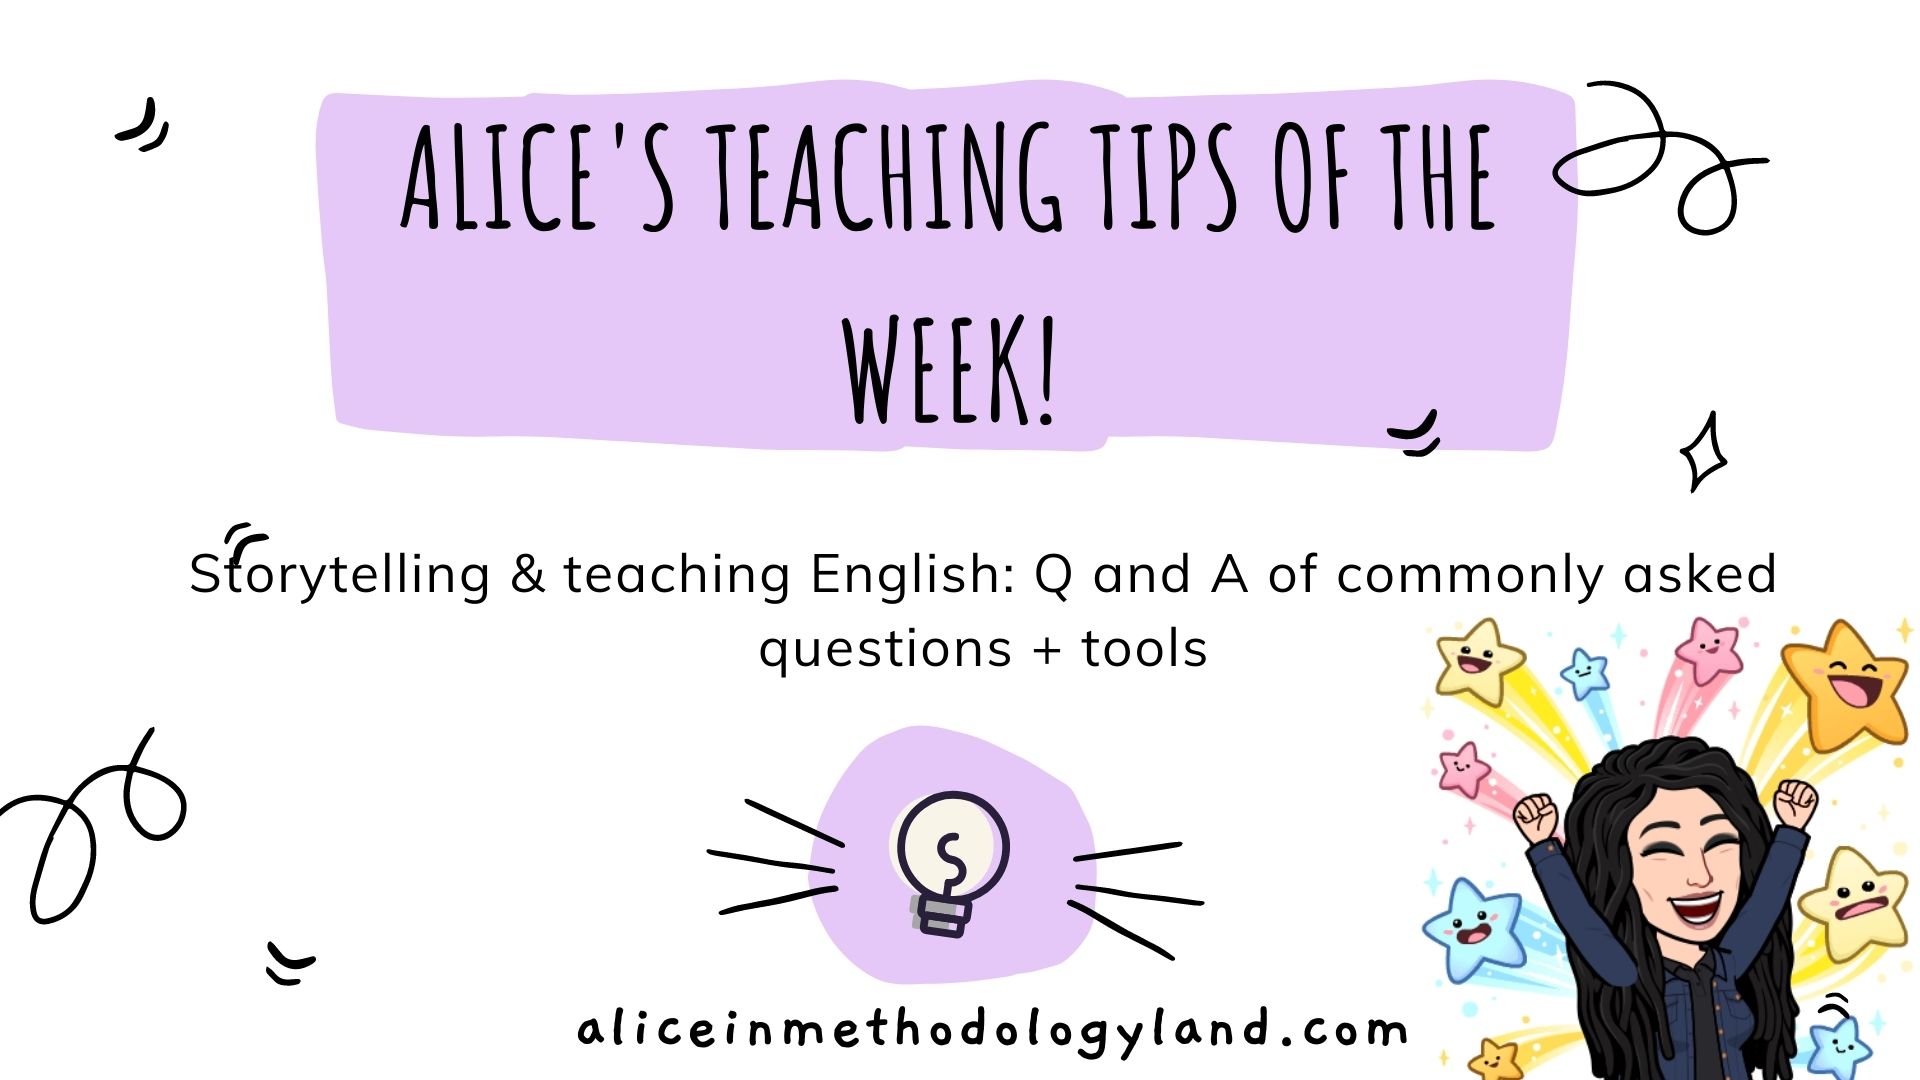 Alice’s Teaching Tips of the Week – Storytelling & Teaching English: Tips and Tools